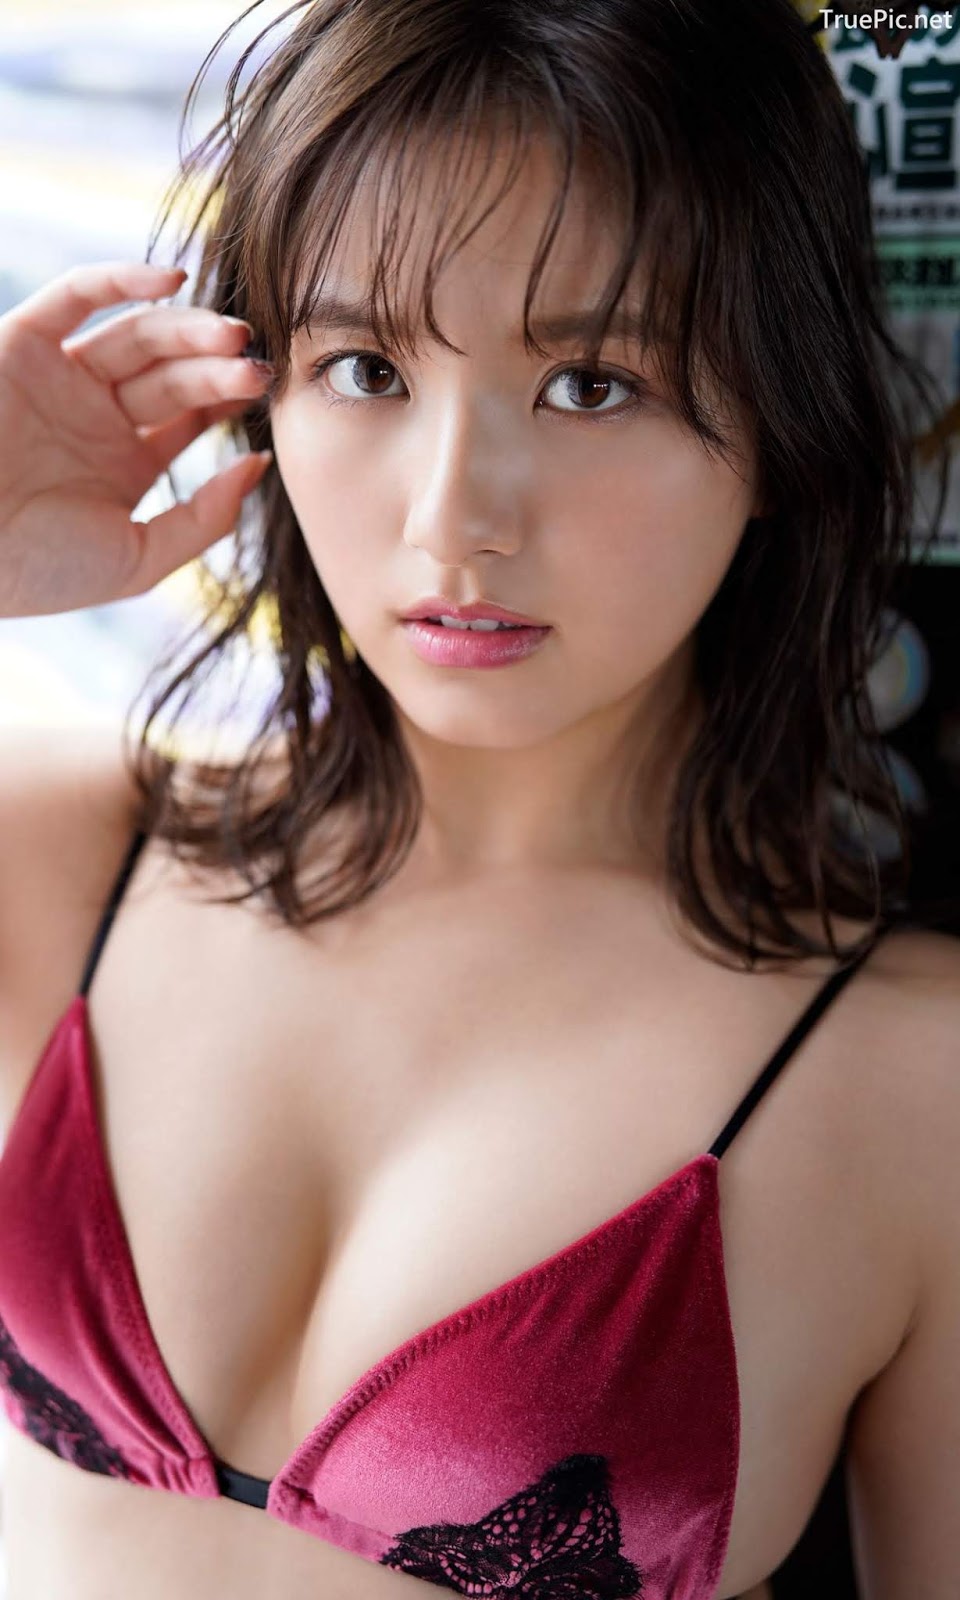 Image Japanese Idol Girl Group AKB48 - Nana Owada - The Other Side of That Door - TruePic.net - Picture-55